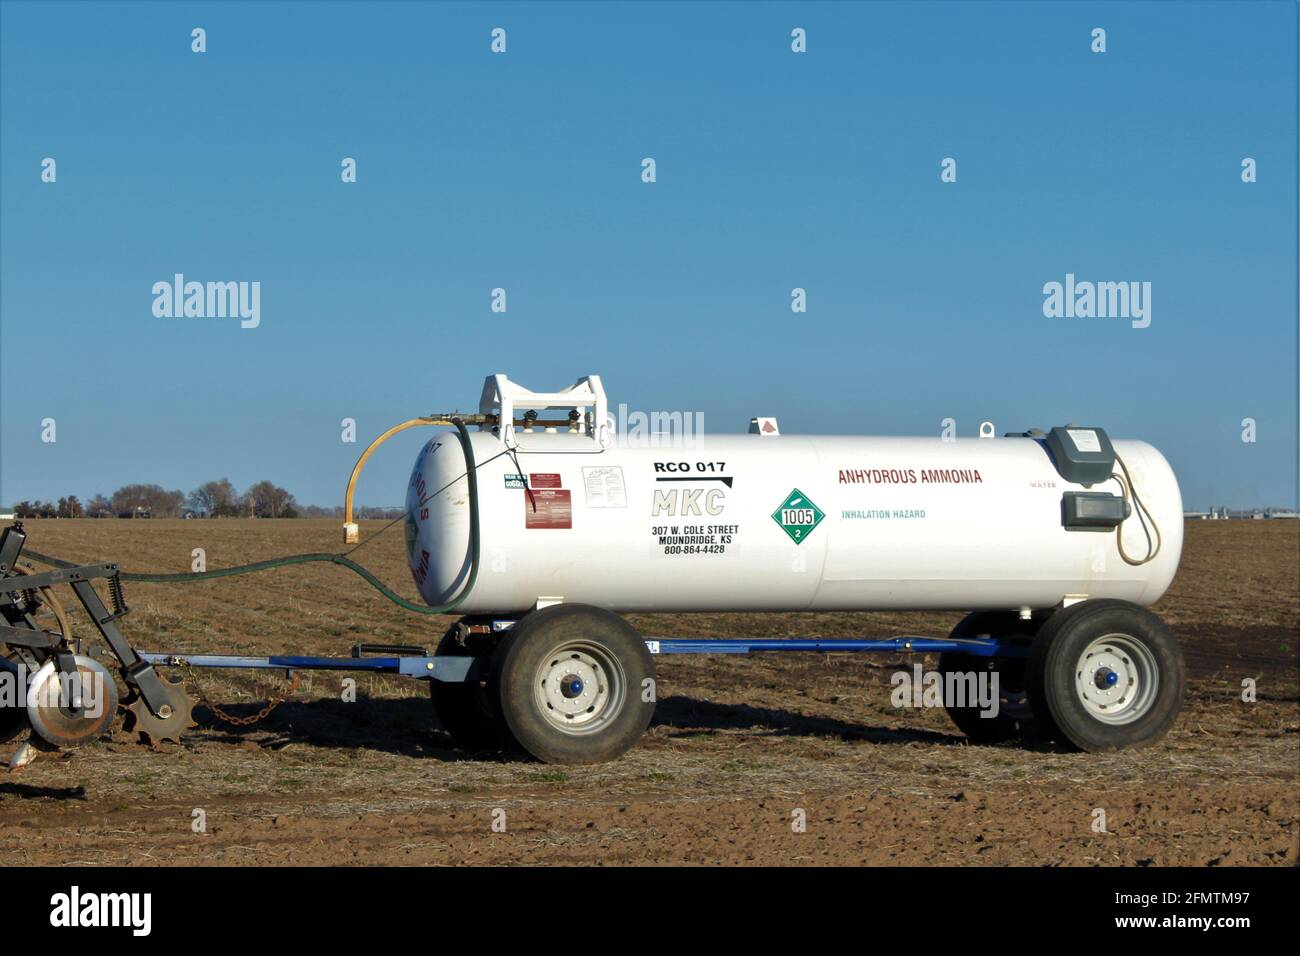 MKC Anhydrous Ammonia tank in a farm field shot closeup hooked up behind a farm tractor on a colorful day in Kansas. Stock Photo